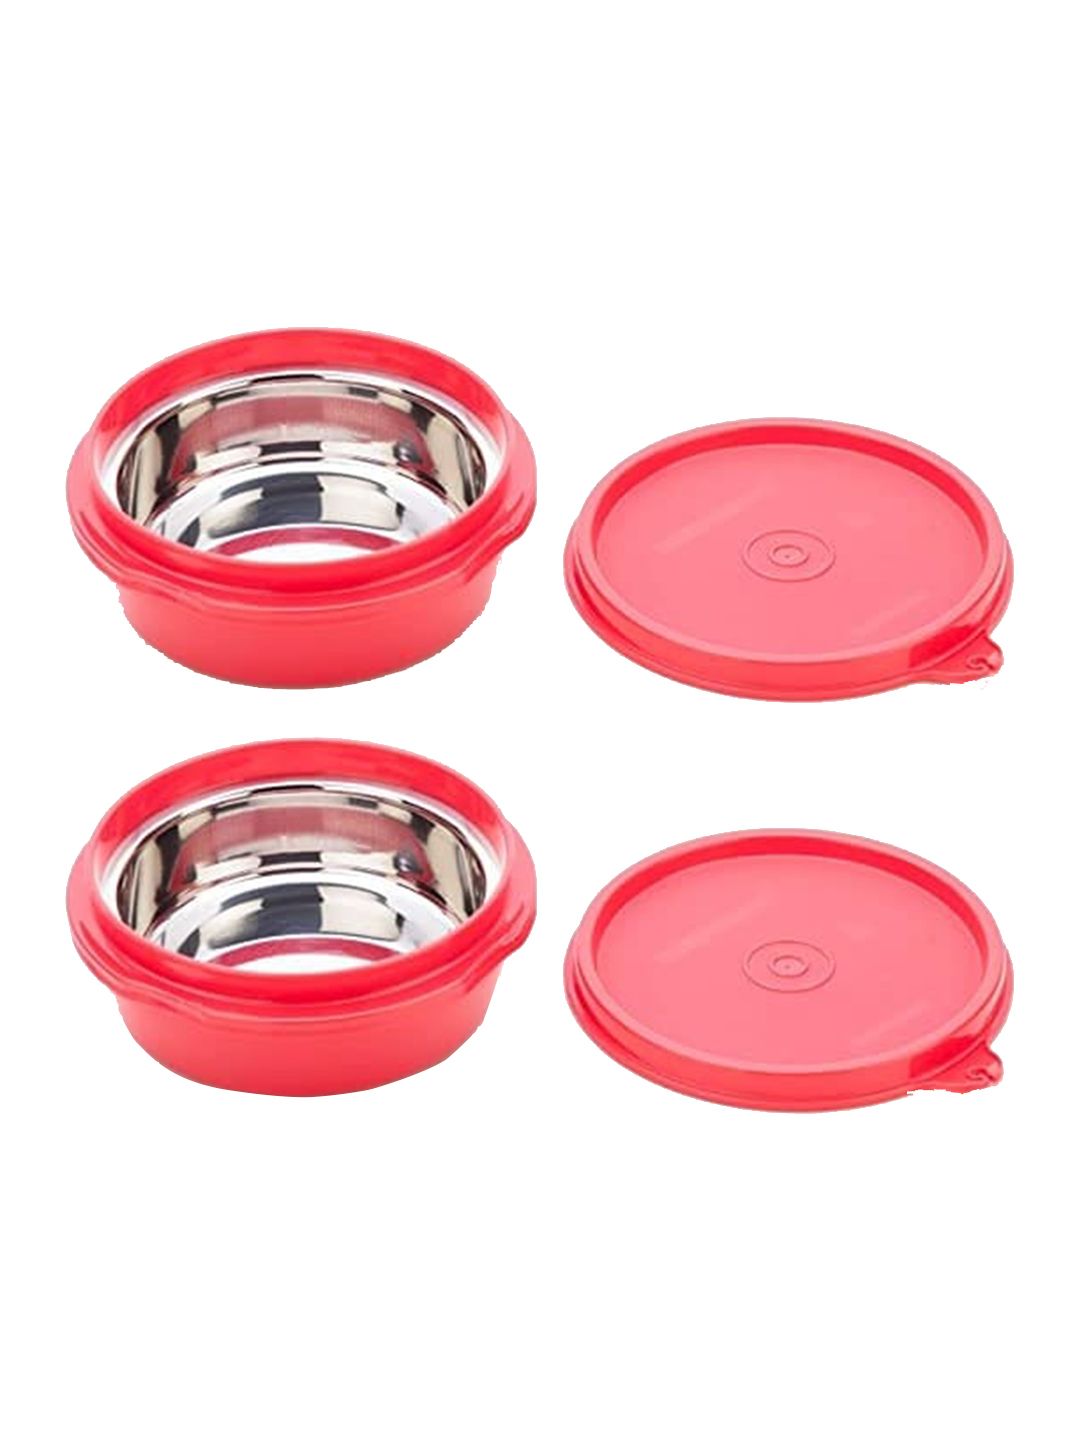 SignoraWare Set of 4 Red Solid Stainless Steel Leak Proof Storage Jars Price in India